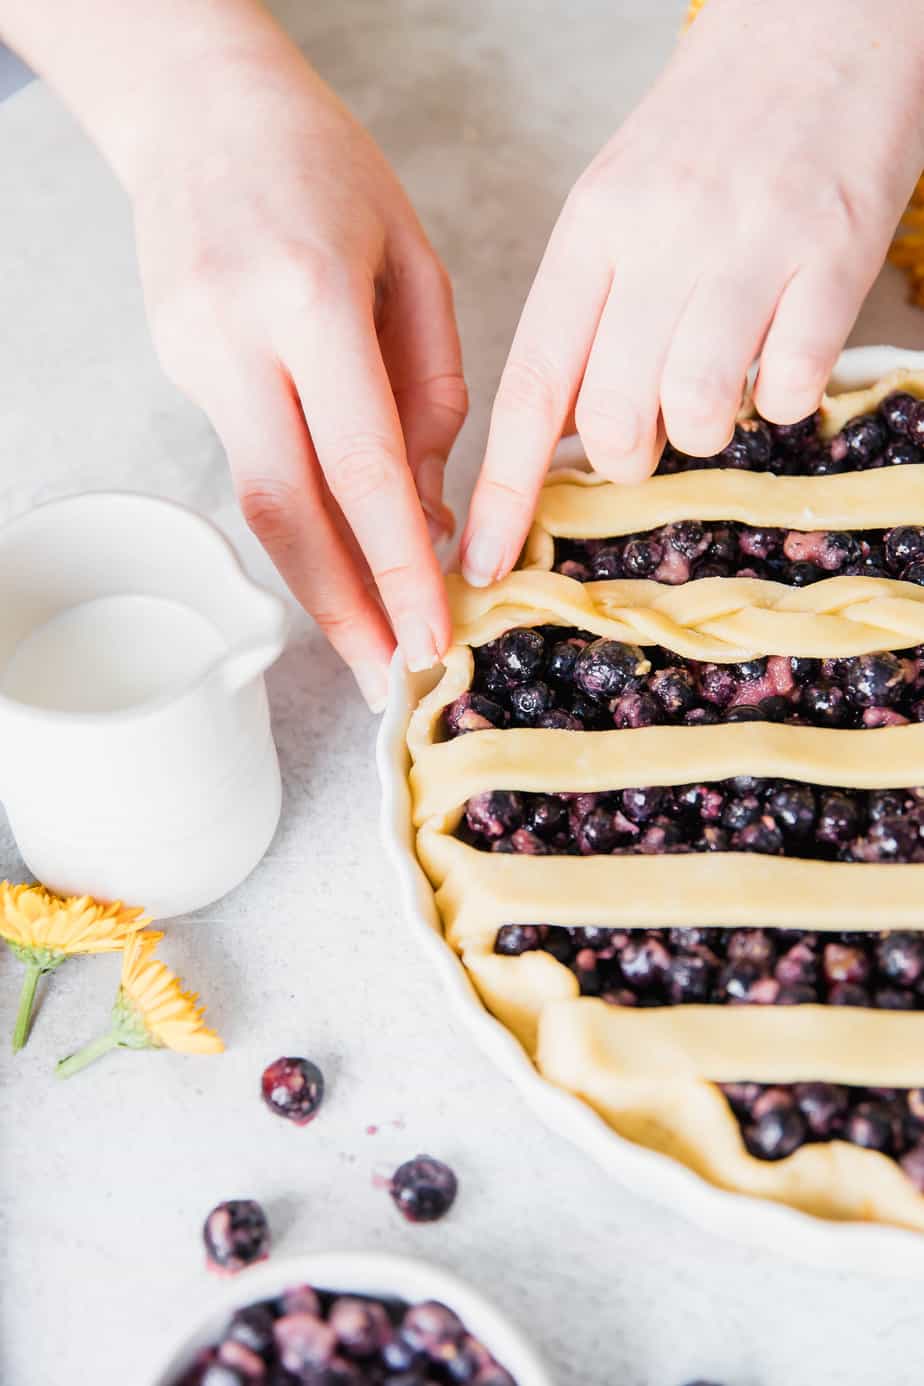 This simple and classic pie is an absolute keeper! Thie Perfect Lemon & Blueberry Pie has a sweet, flakey pastry with a delicious, juicy filling. If that doesn't sound like pie perfection I don't what does!?